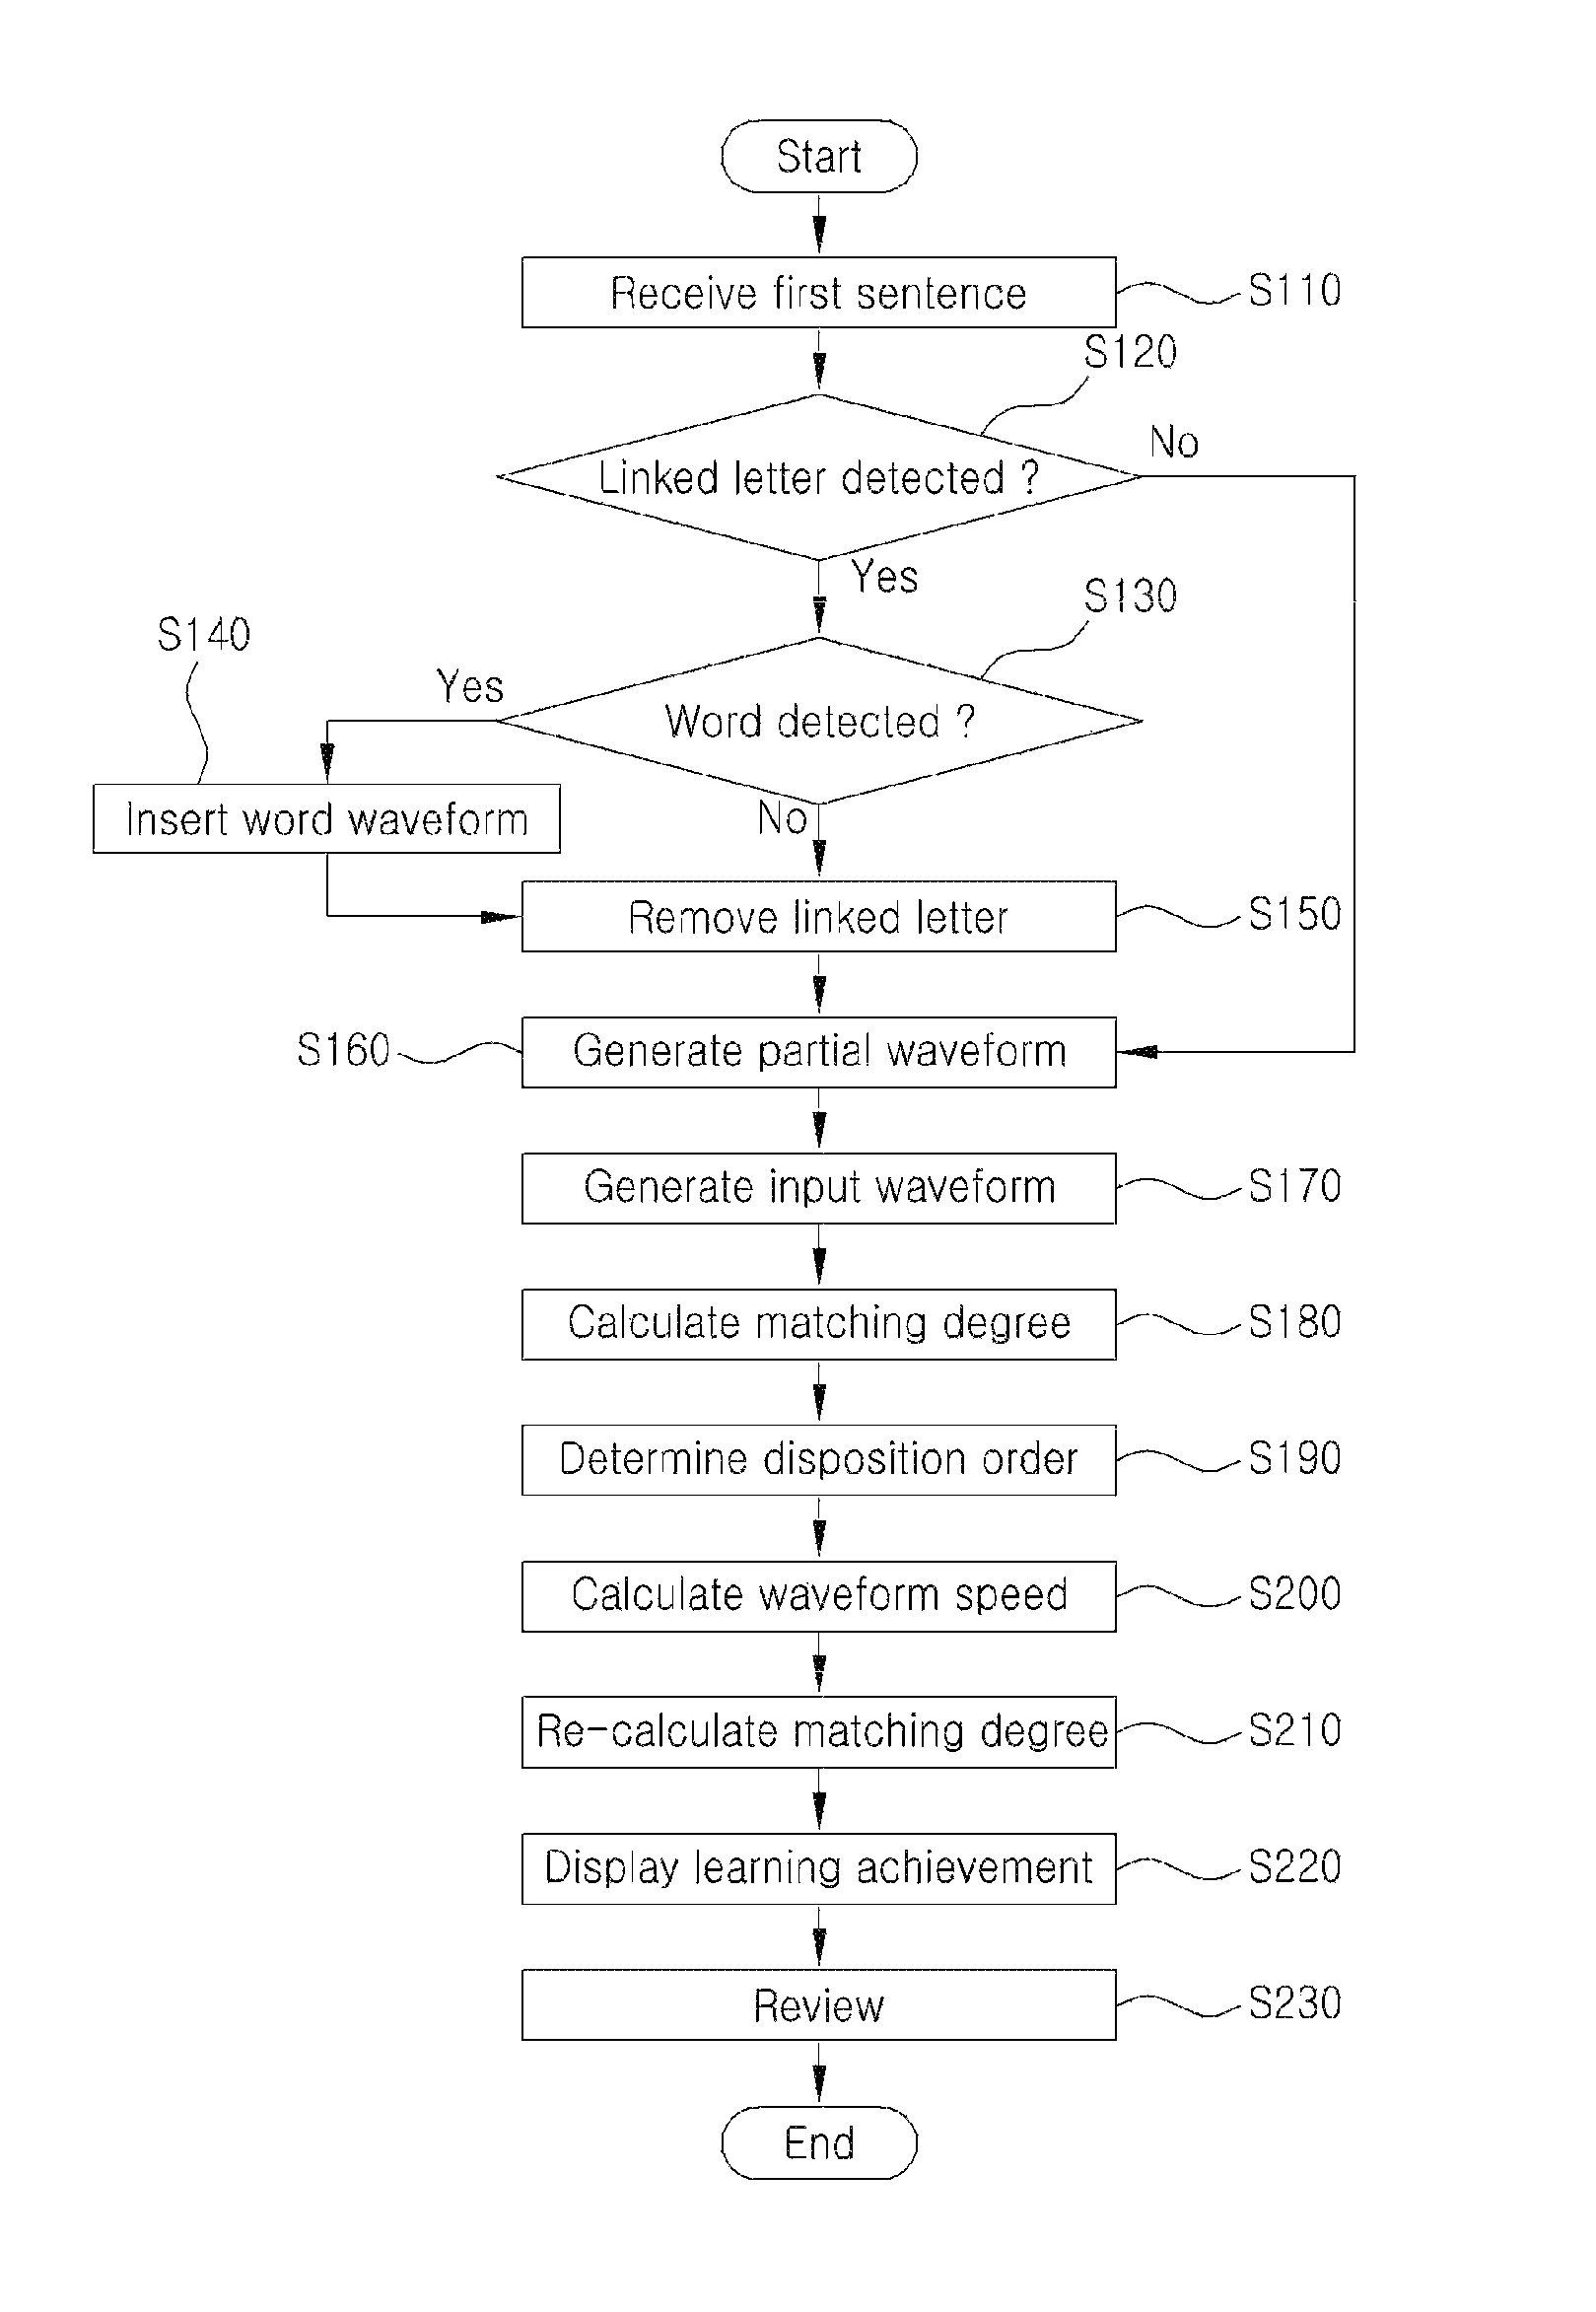 Foreign language learning apparatus and method for correcting pronunciation through sentence input